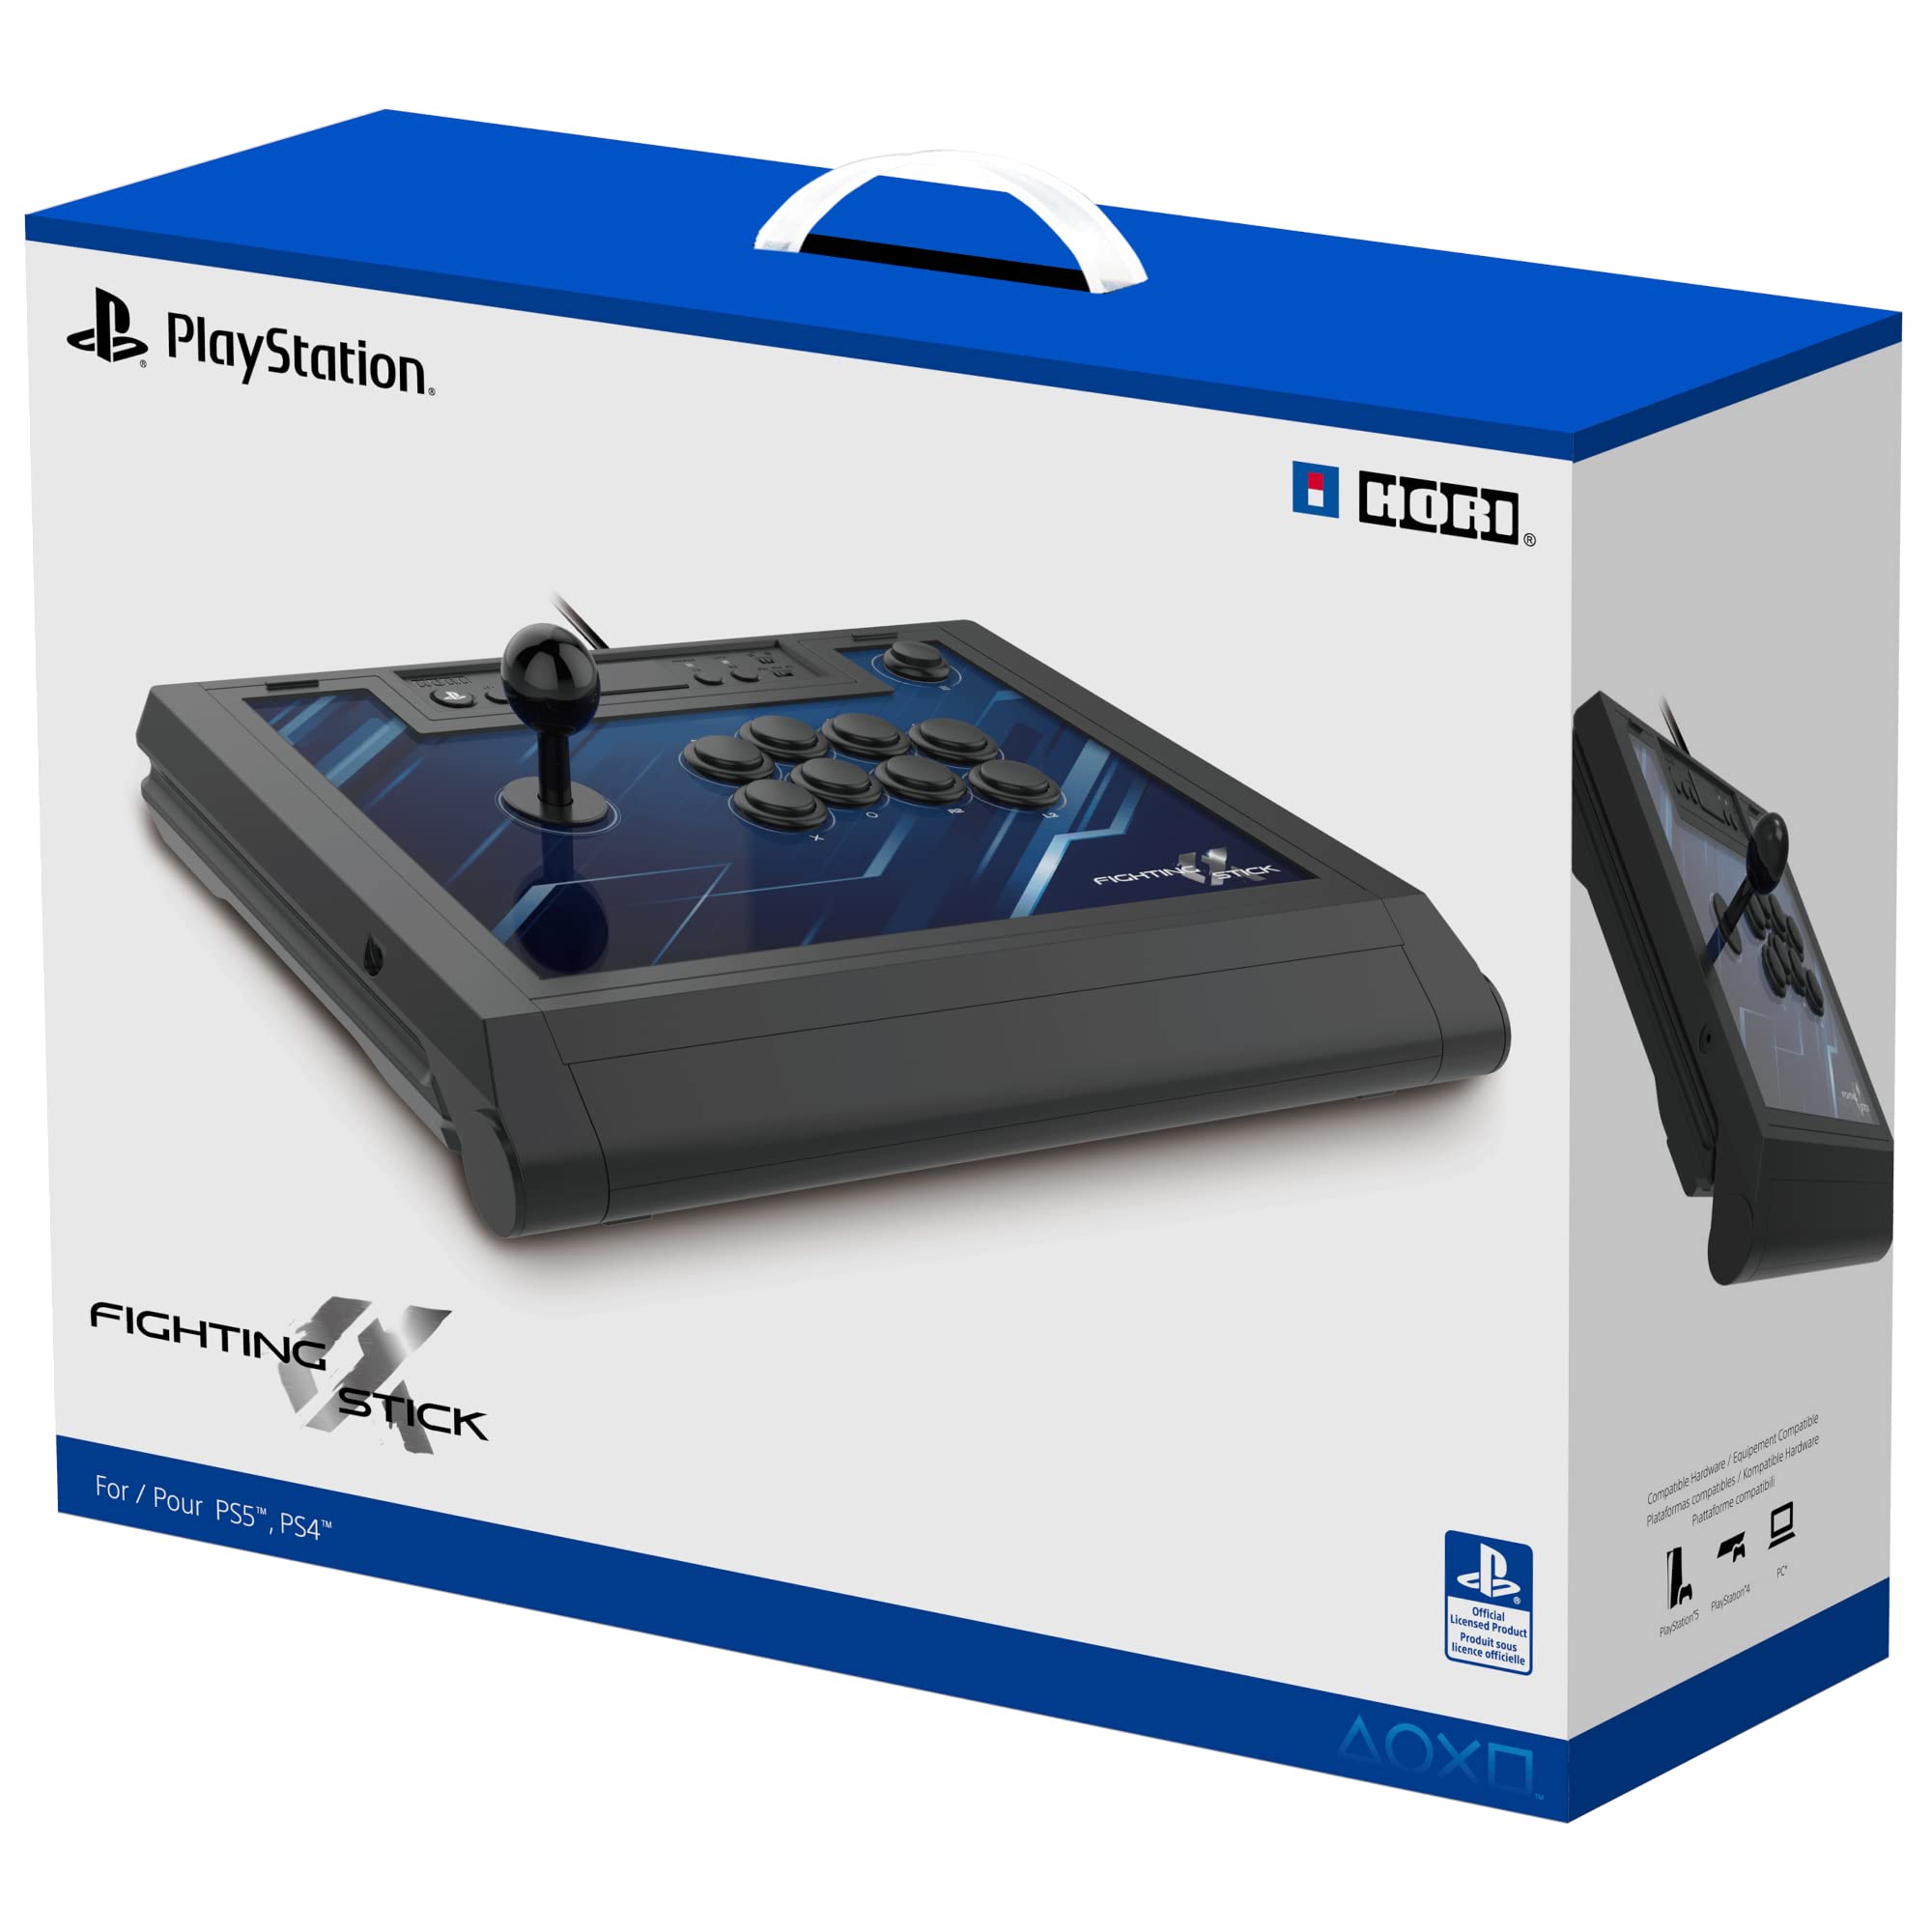 HORI Playstation 5 Fighting Stick Alpha (Ps5.Ps4,Pc)